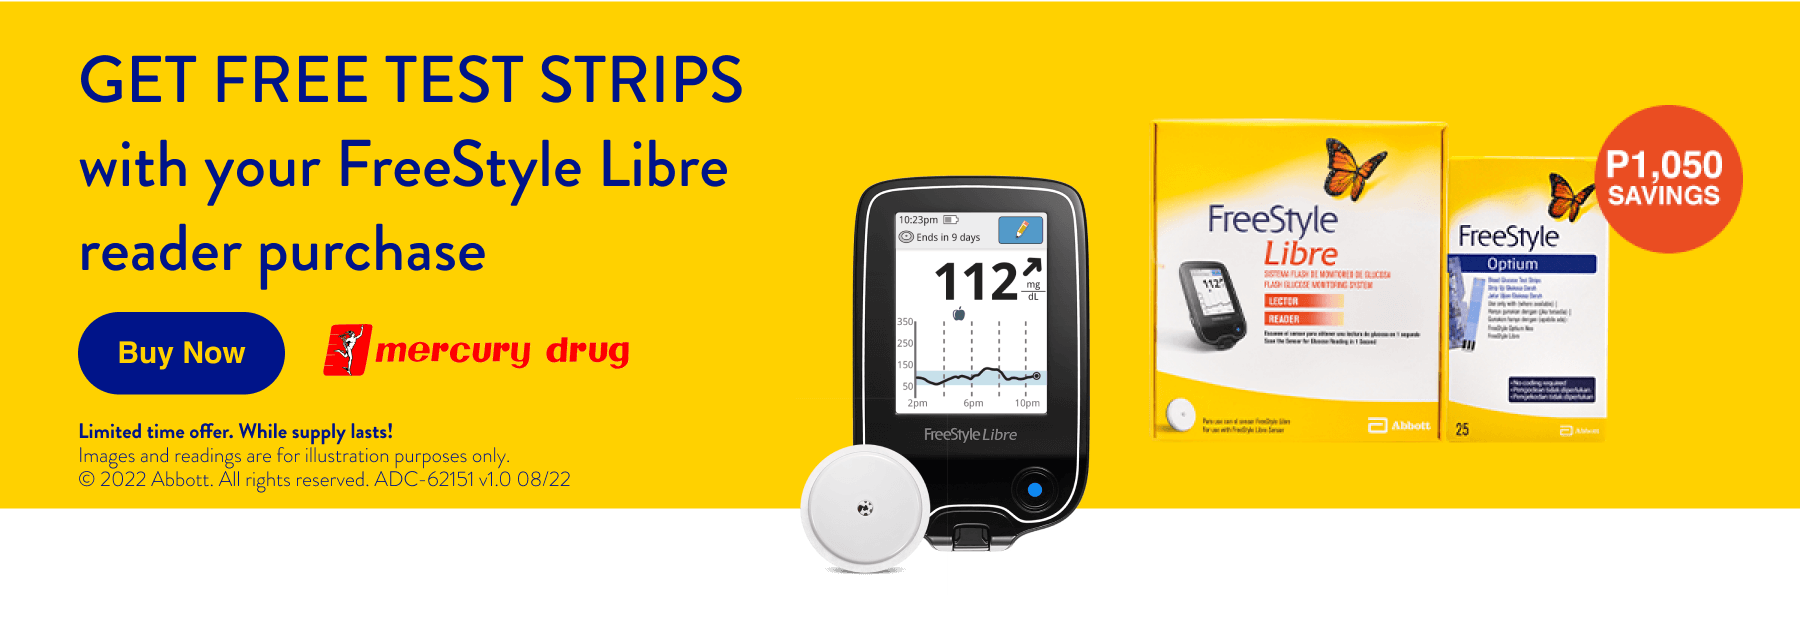 Get Free test strips with your FreeStyle Libre reader purchase